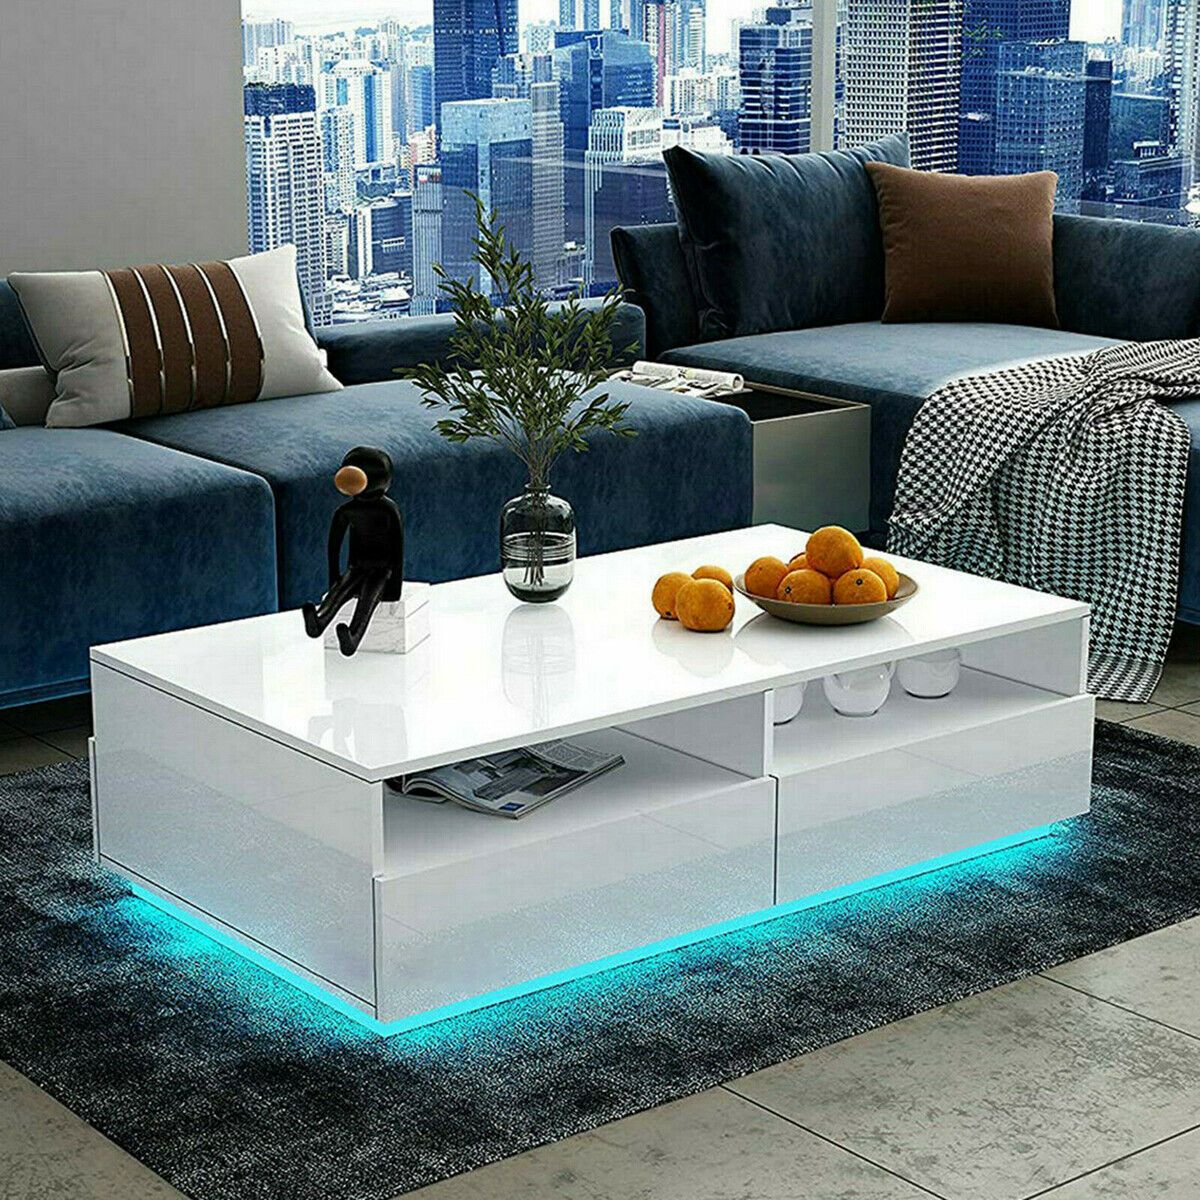 High Gloss 16 Colors Led Light Coffee Table W/ 4 Drawers Living Room Modern  | Ebay In Led Coffee Tables With 4 Drawers (View 5 of 15)